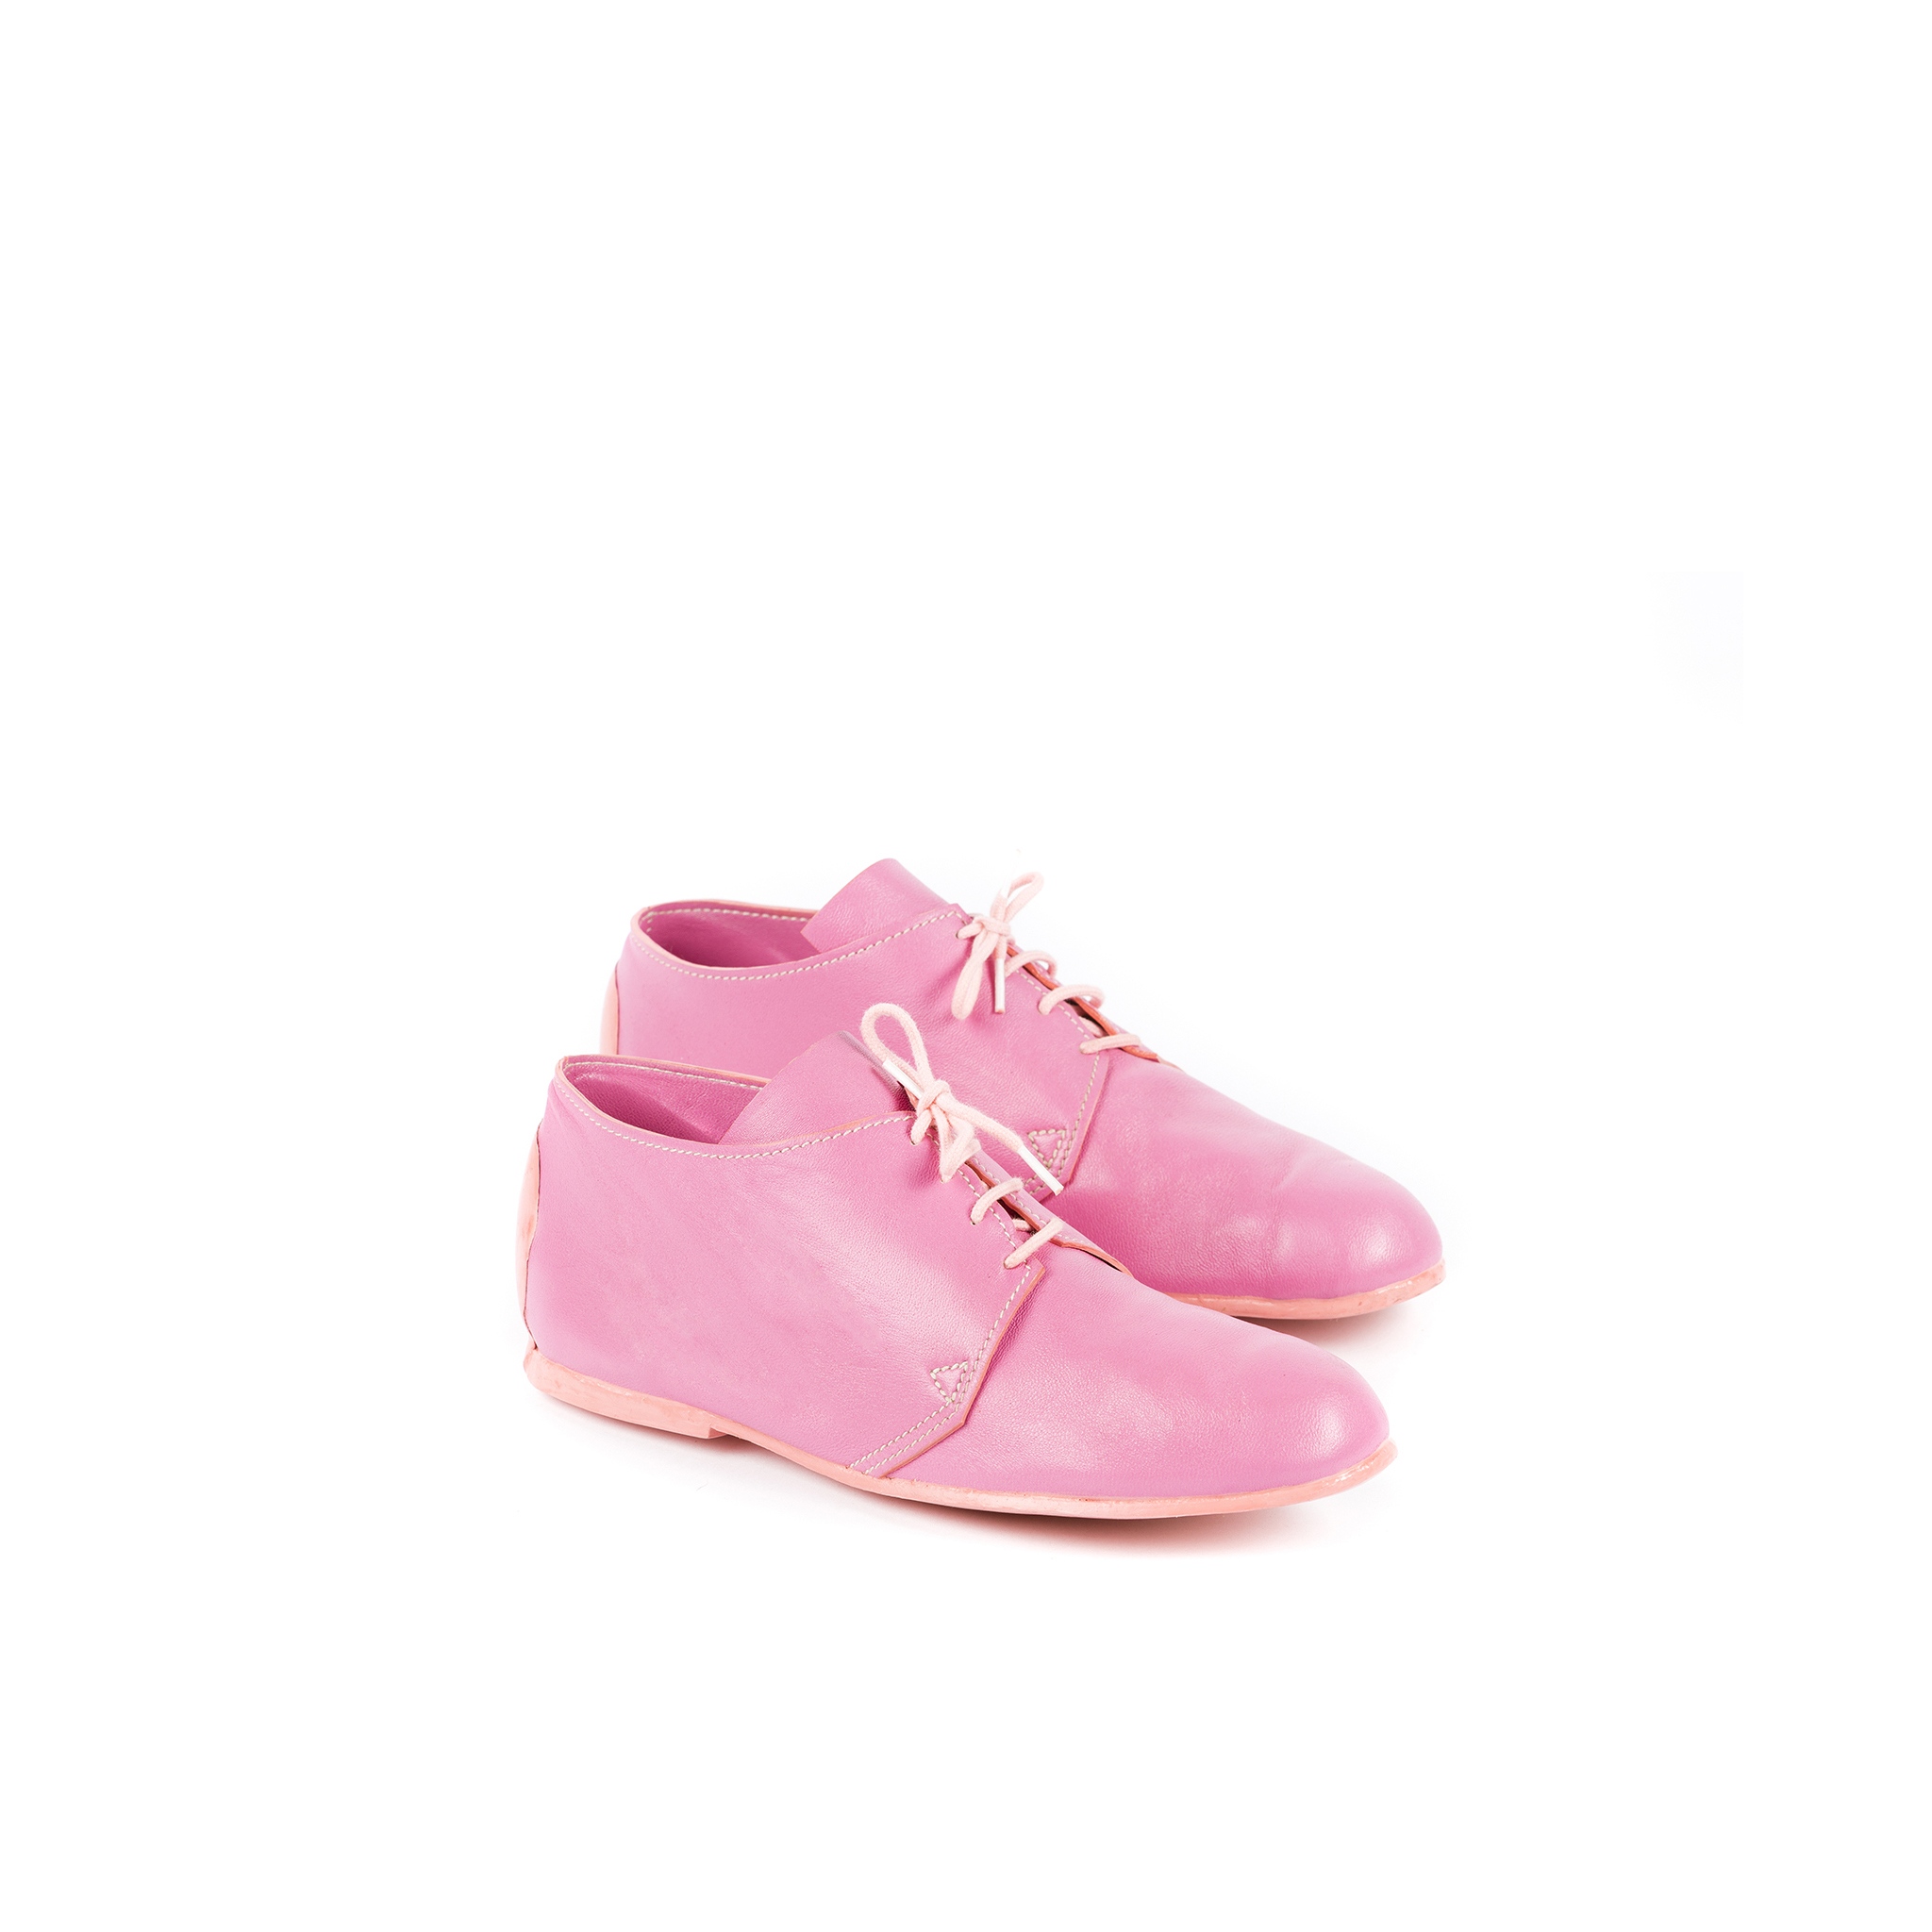 Titi Derby Shoes - Glossy leather - Pink color